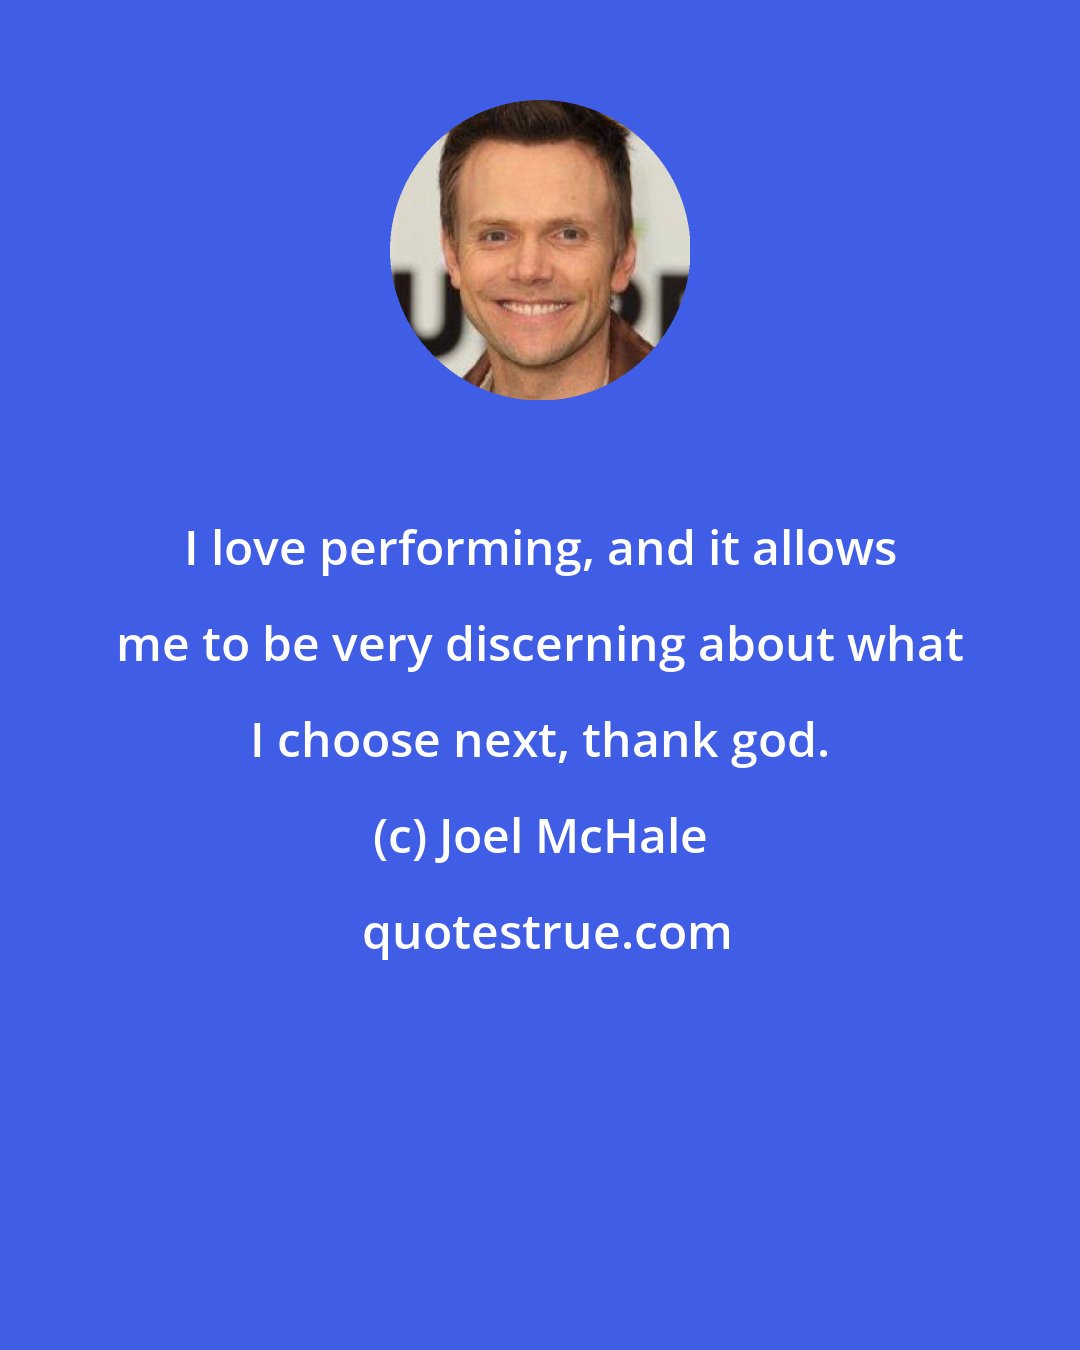 Joel McHale: I love performing, and it allows me to be very discerning about what I choose next, thank god.